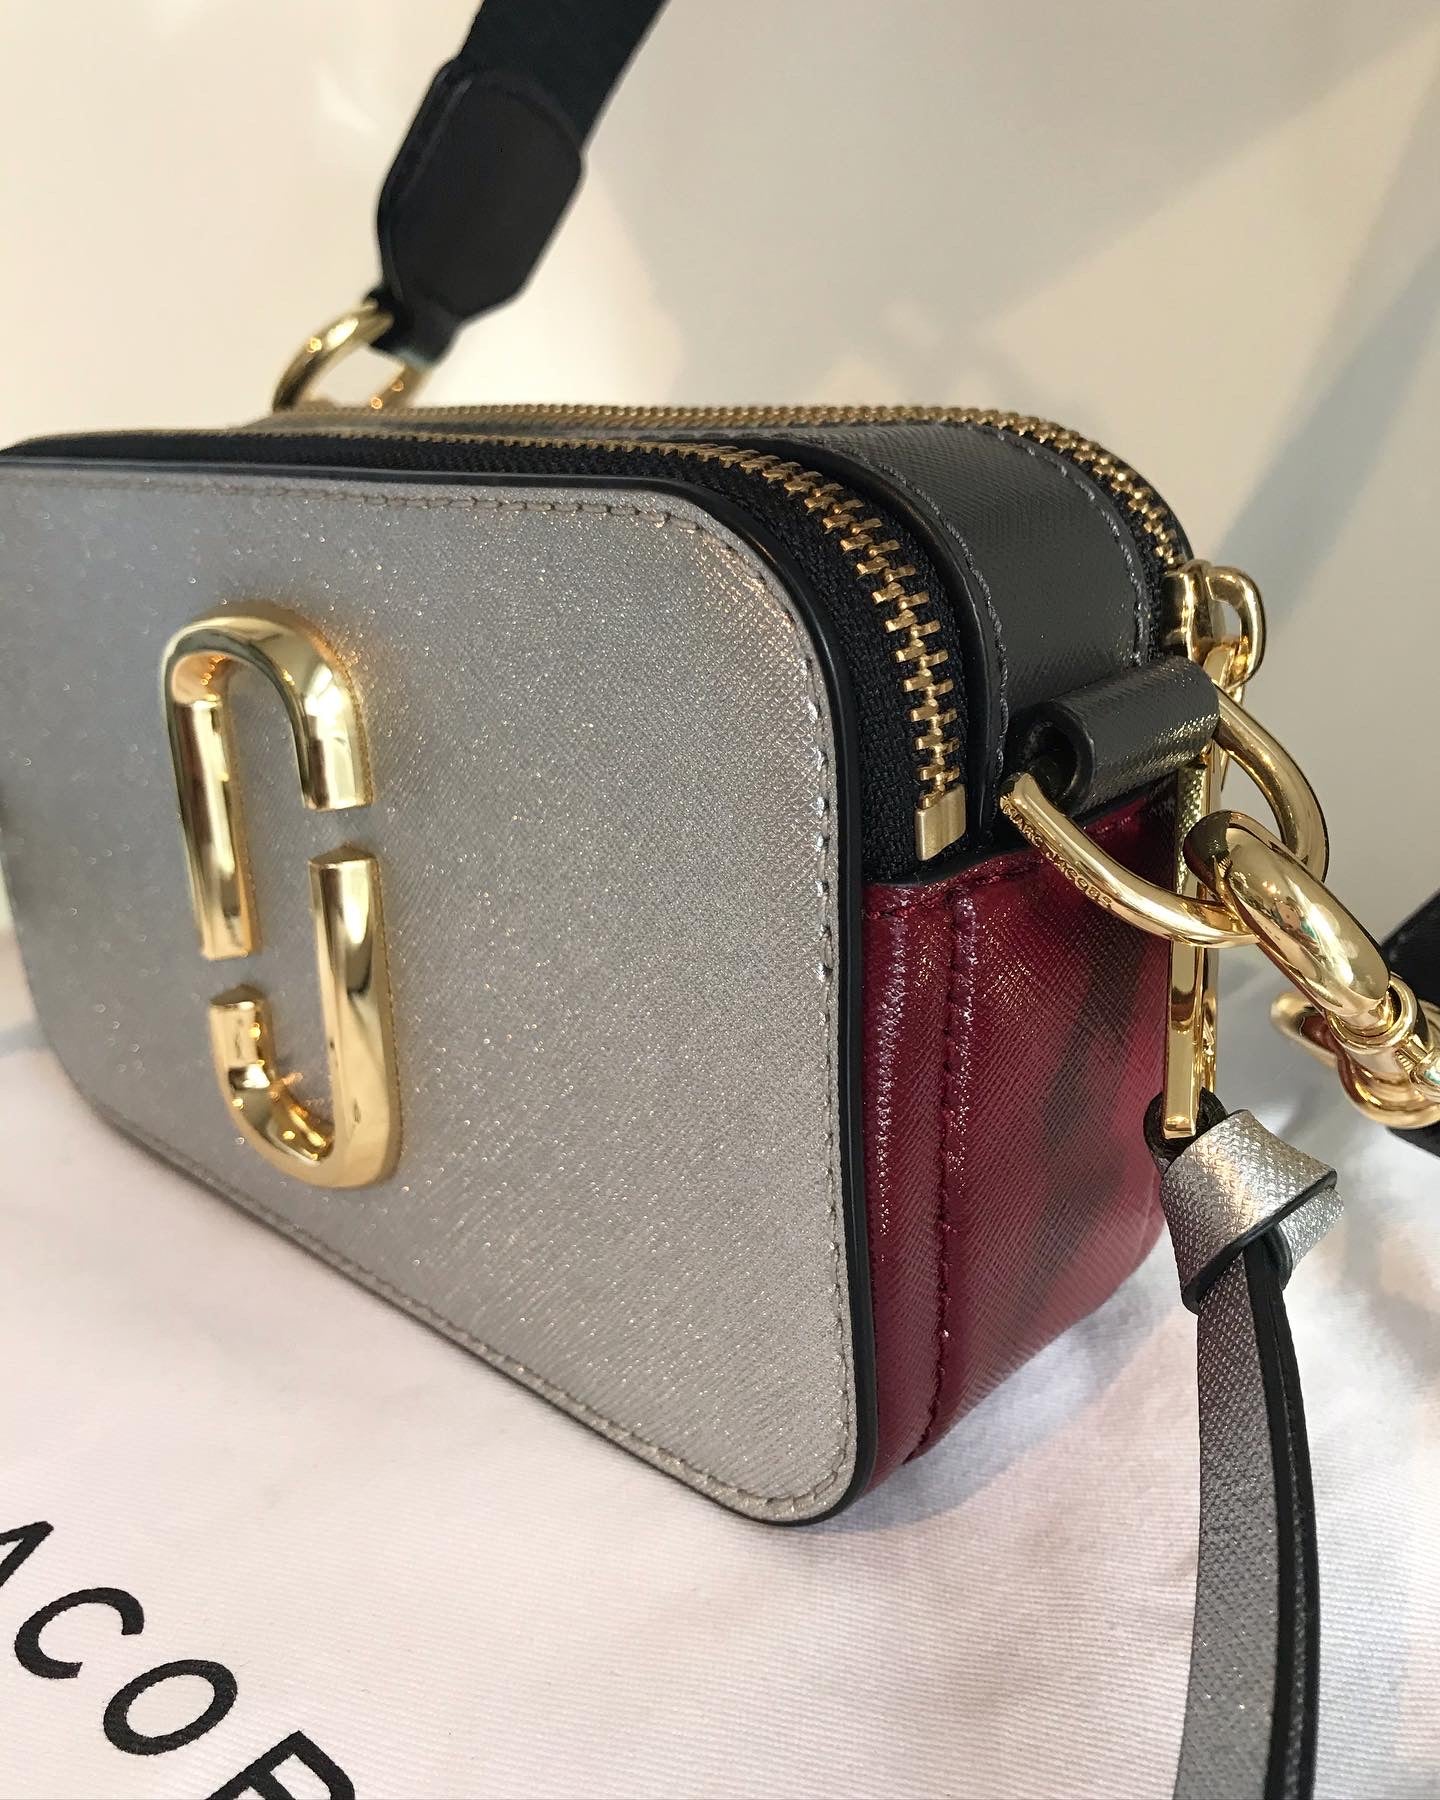 Von Maur on Instagram: Check out the Snapshot by Marc Jacobs! This  must-have crossbody features a modern color block style and adds serious  luxury to any outfit. If you love @marcjacobs, as